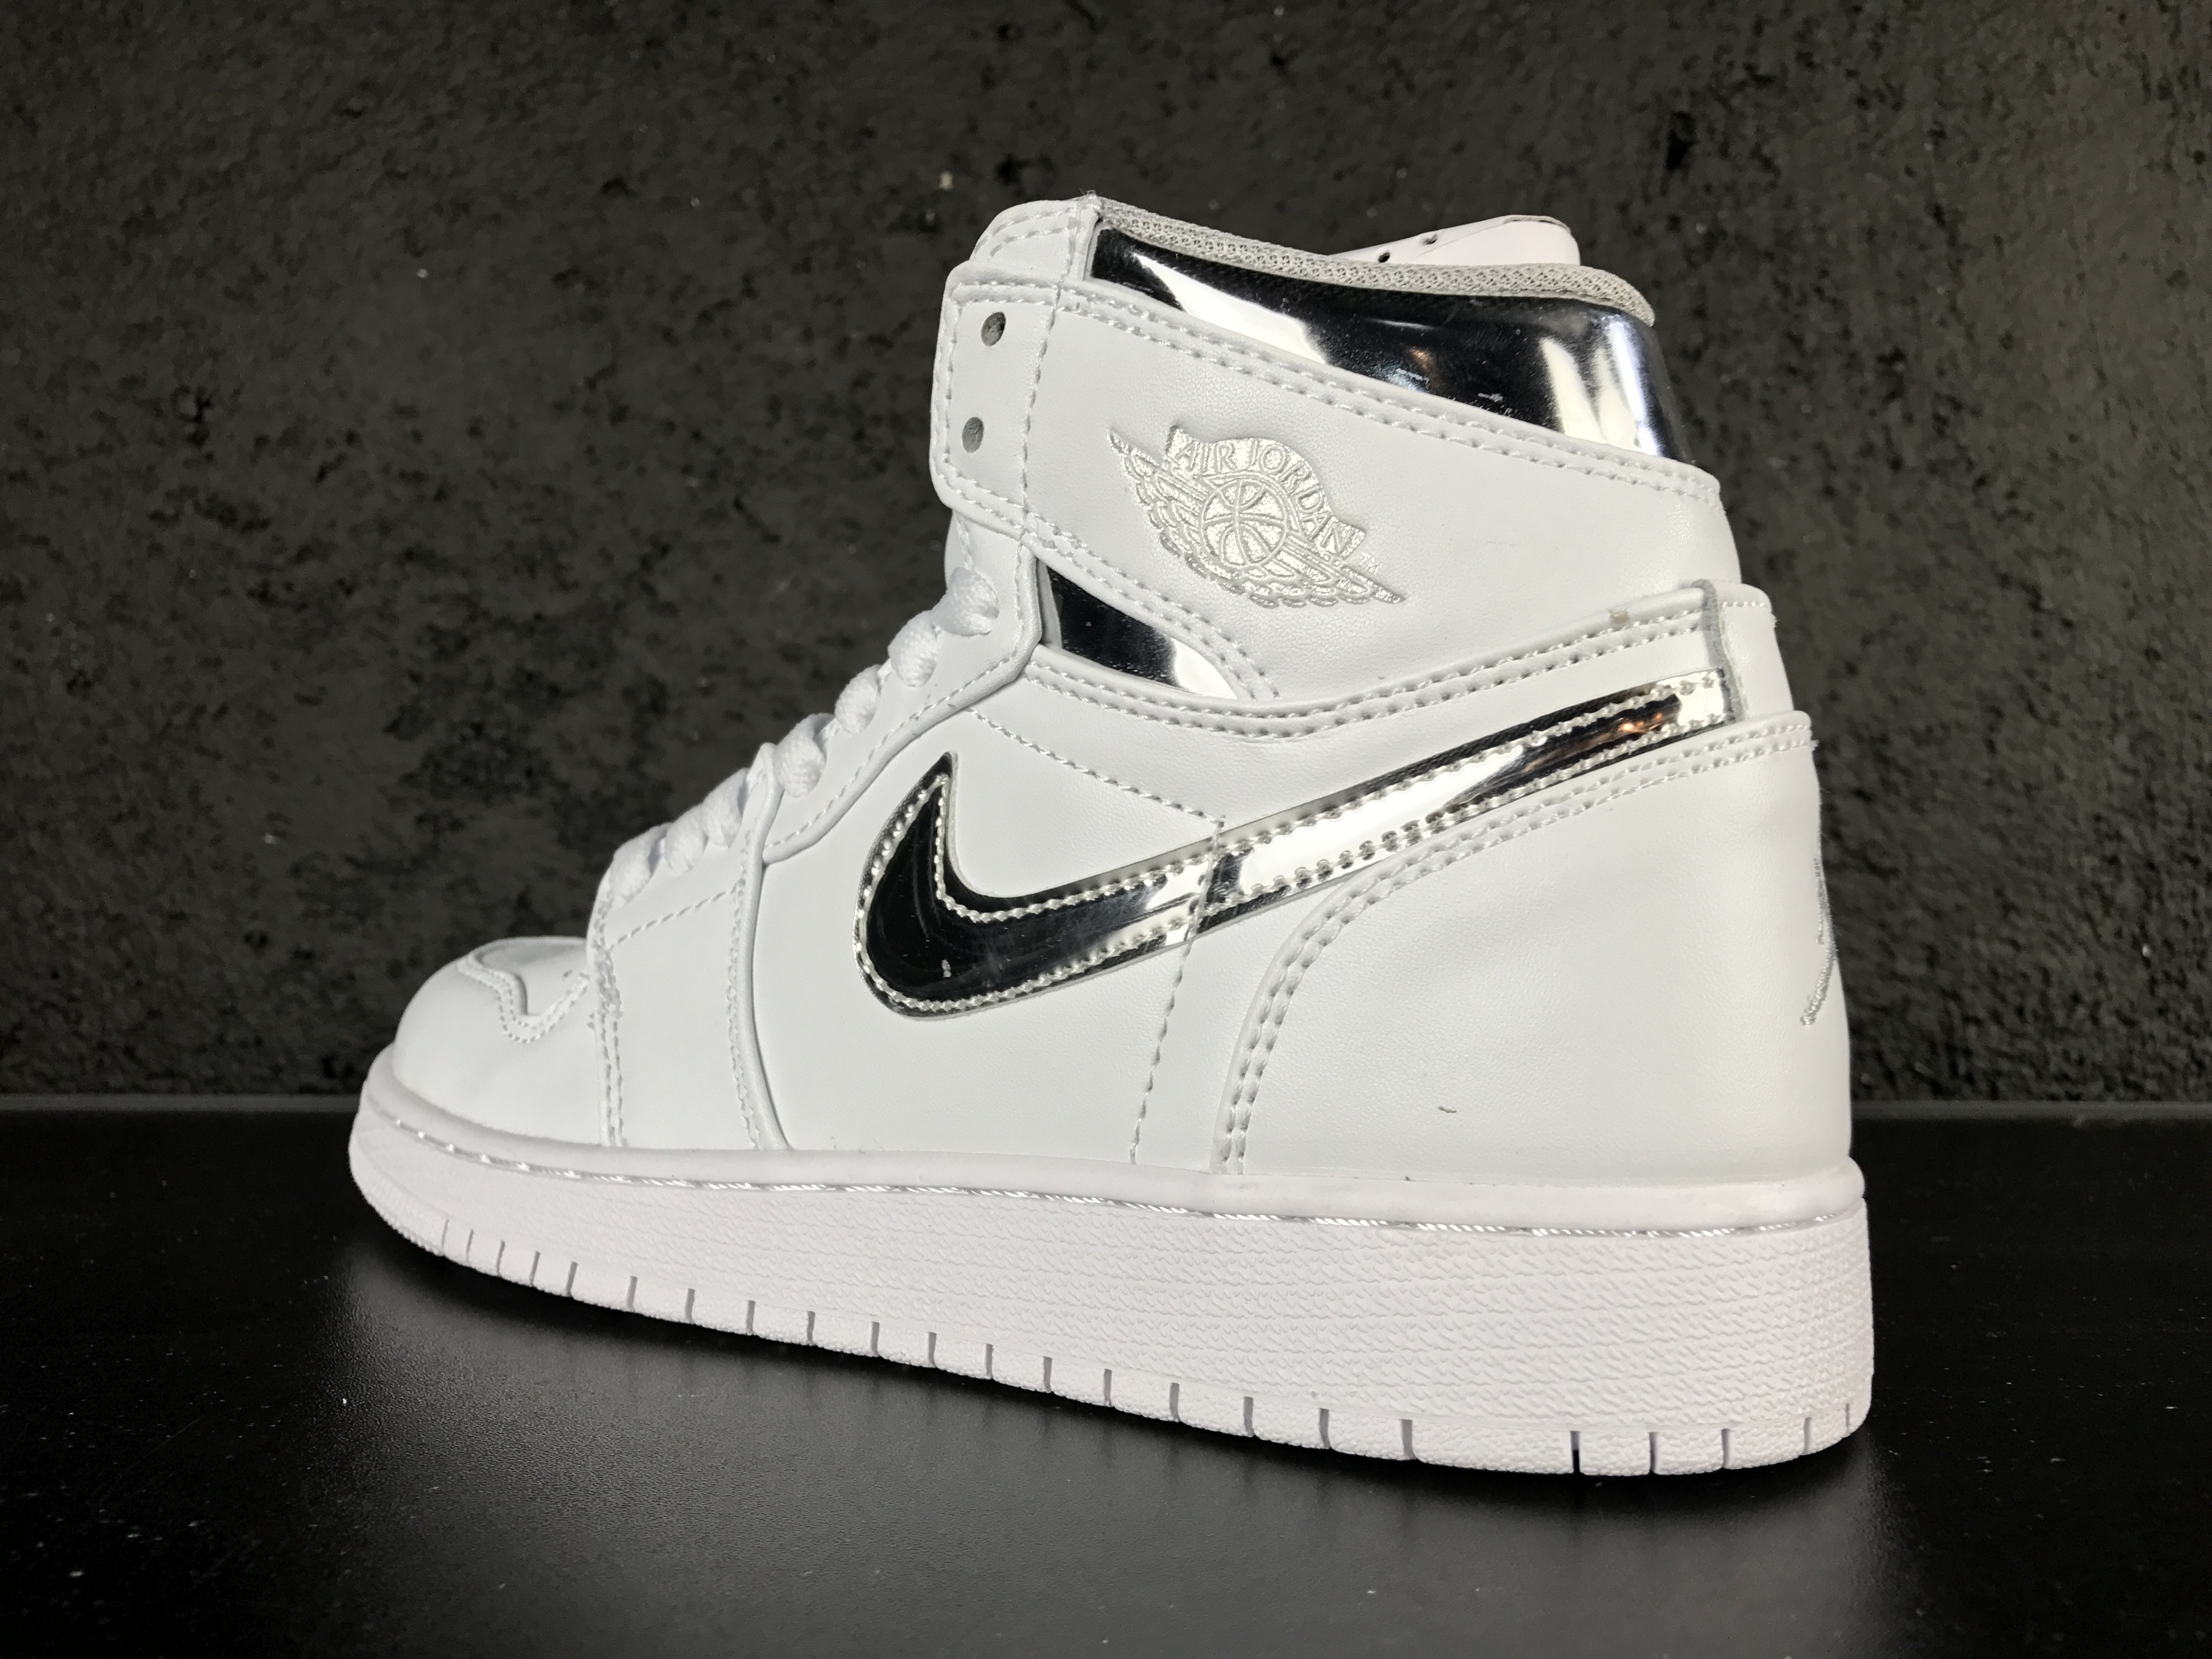 New Air Jordan 1 White Silver Shoes - Click Image to Close